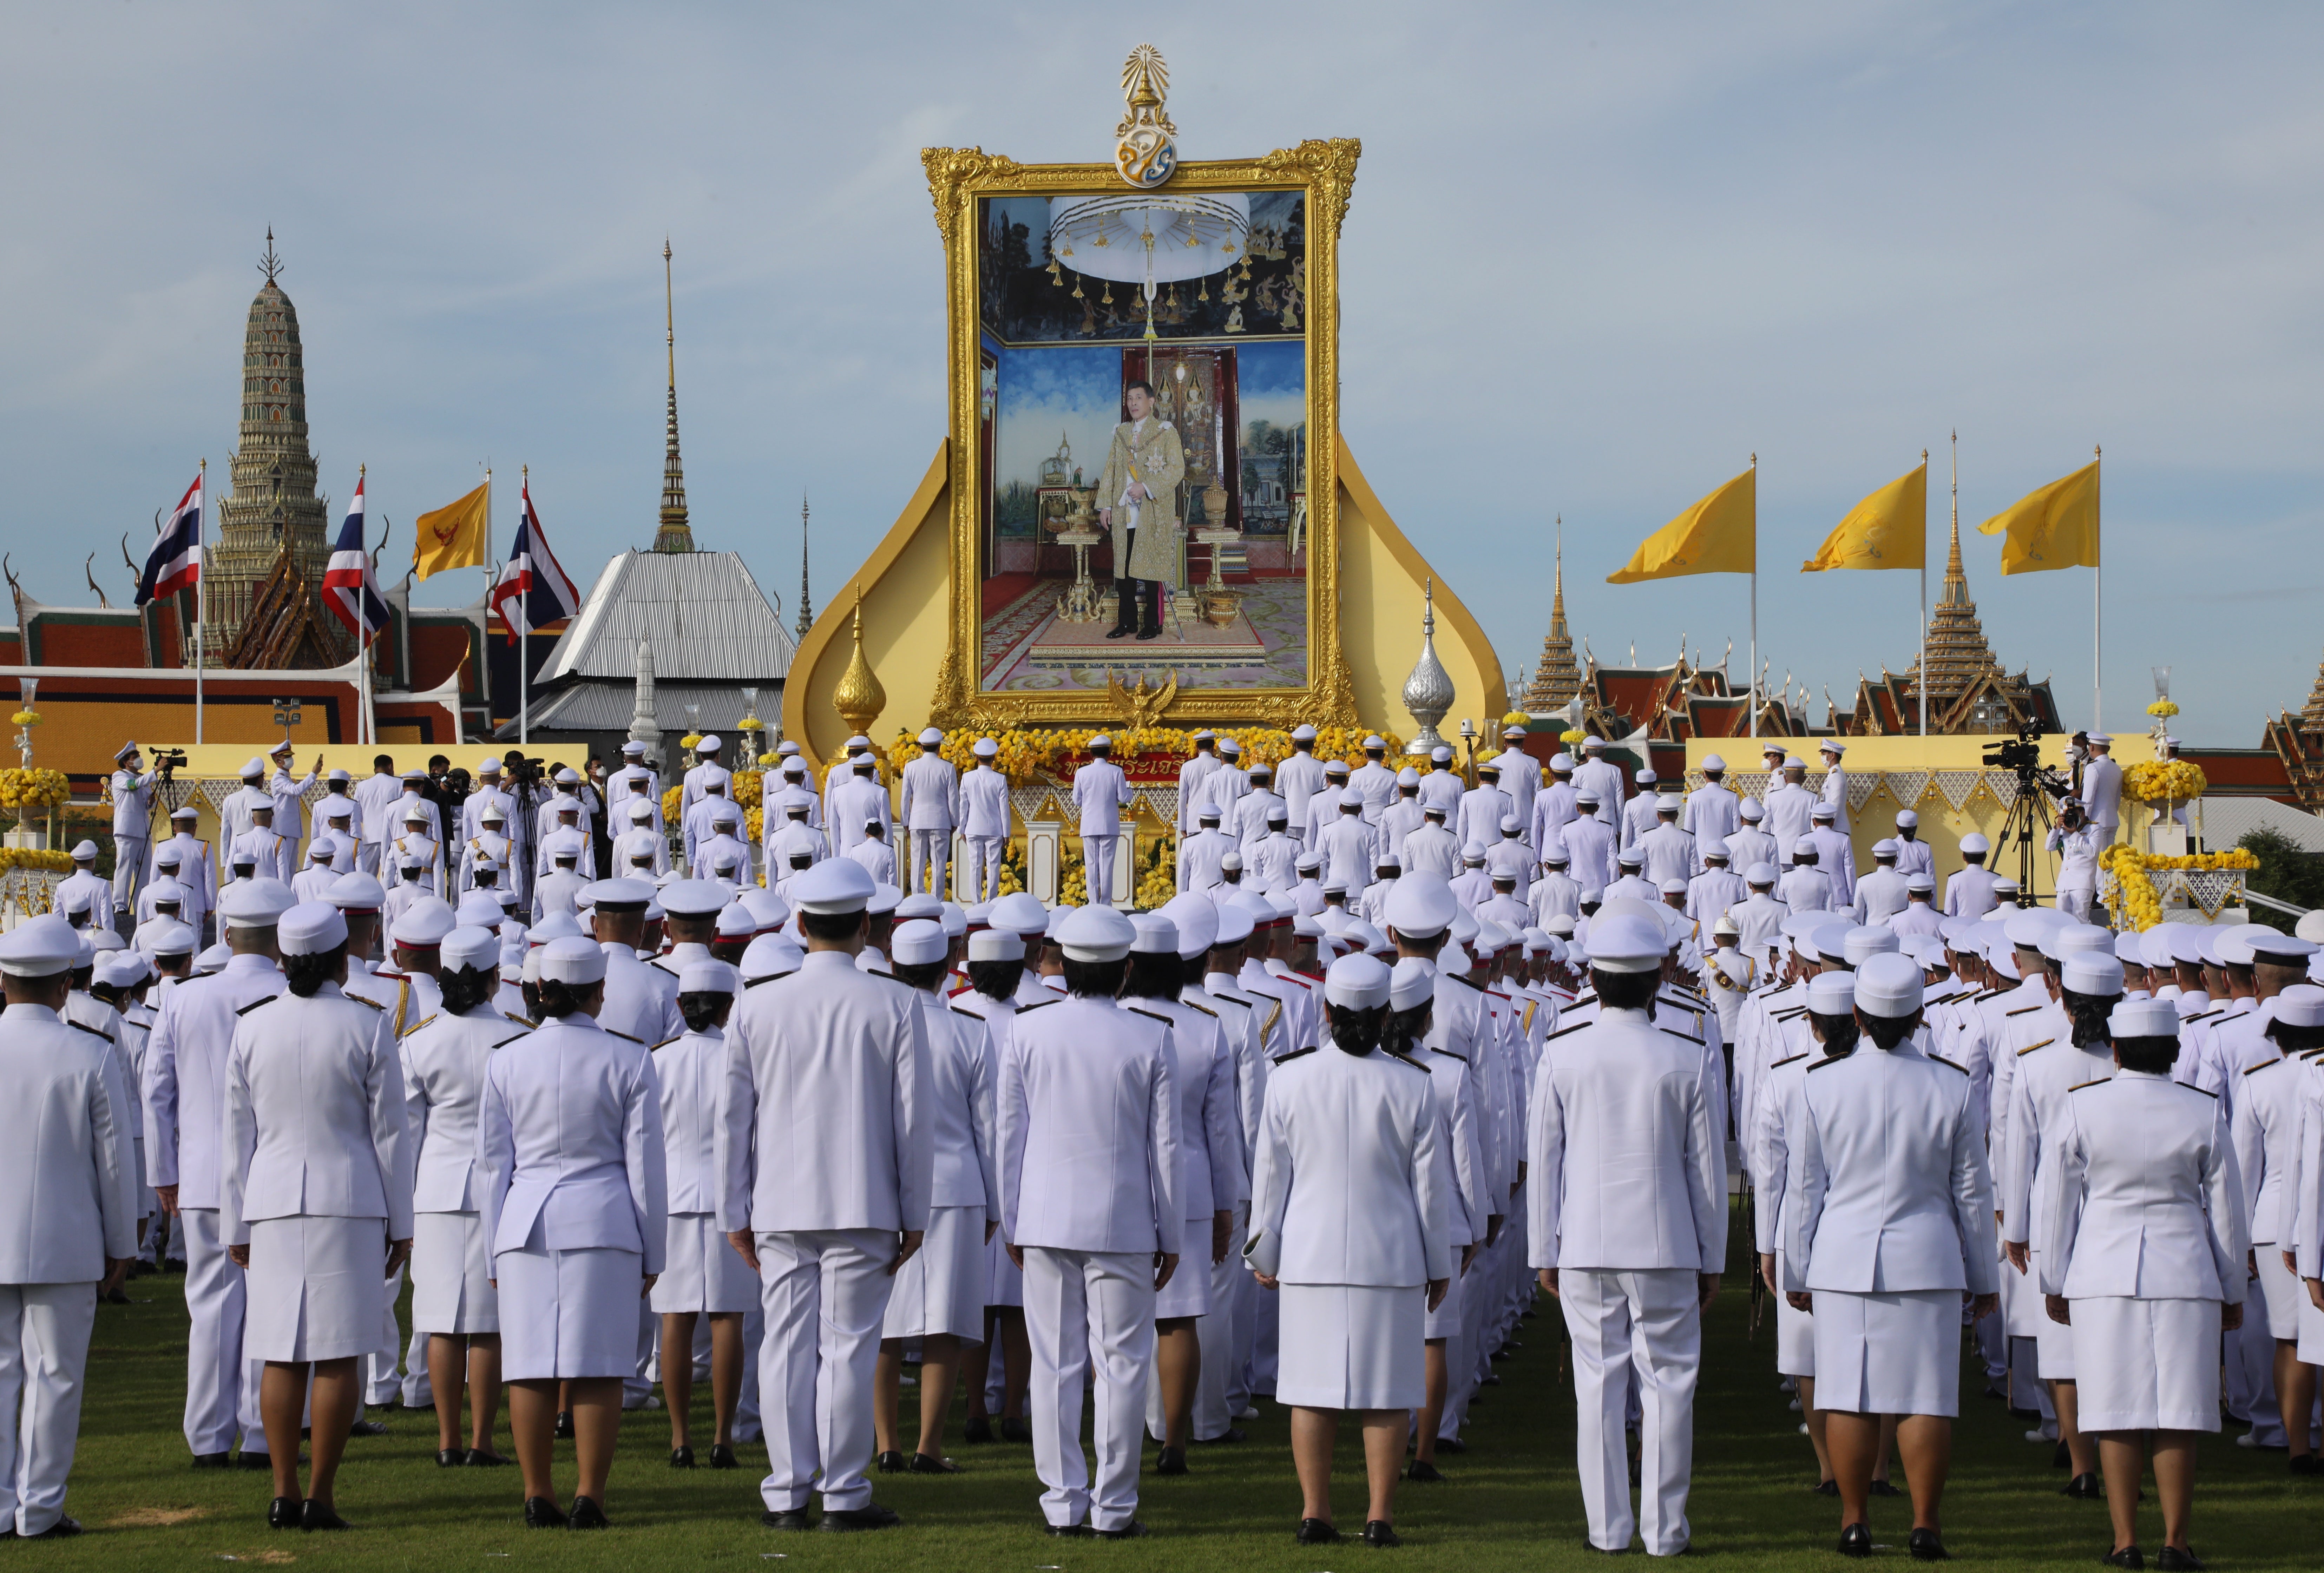 Thai caretaker Prime Minister Prayut Chan-o-cha (C) leads his cabinet and government officials in the salute to the portrait of Thai King Maha Vajiralongkorn Bodindradebayavarangkun during a ceremony for taking the oath of allegiance to become lawful civil servants, held to mark the king's 71st birthday at the royal grounds of Sanam Luang, outside the Grand Palace in Bangkok, Thailand, 28 July 2023